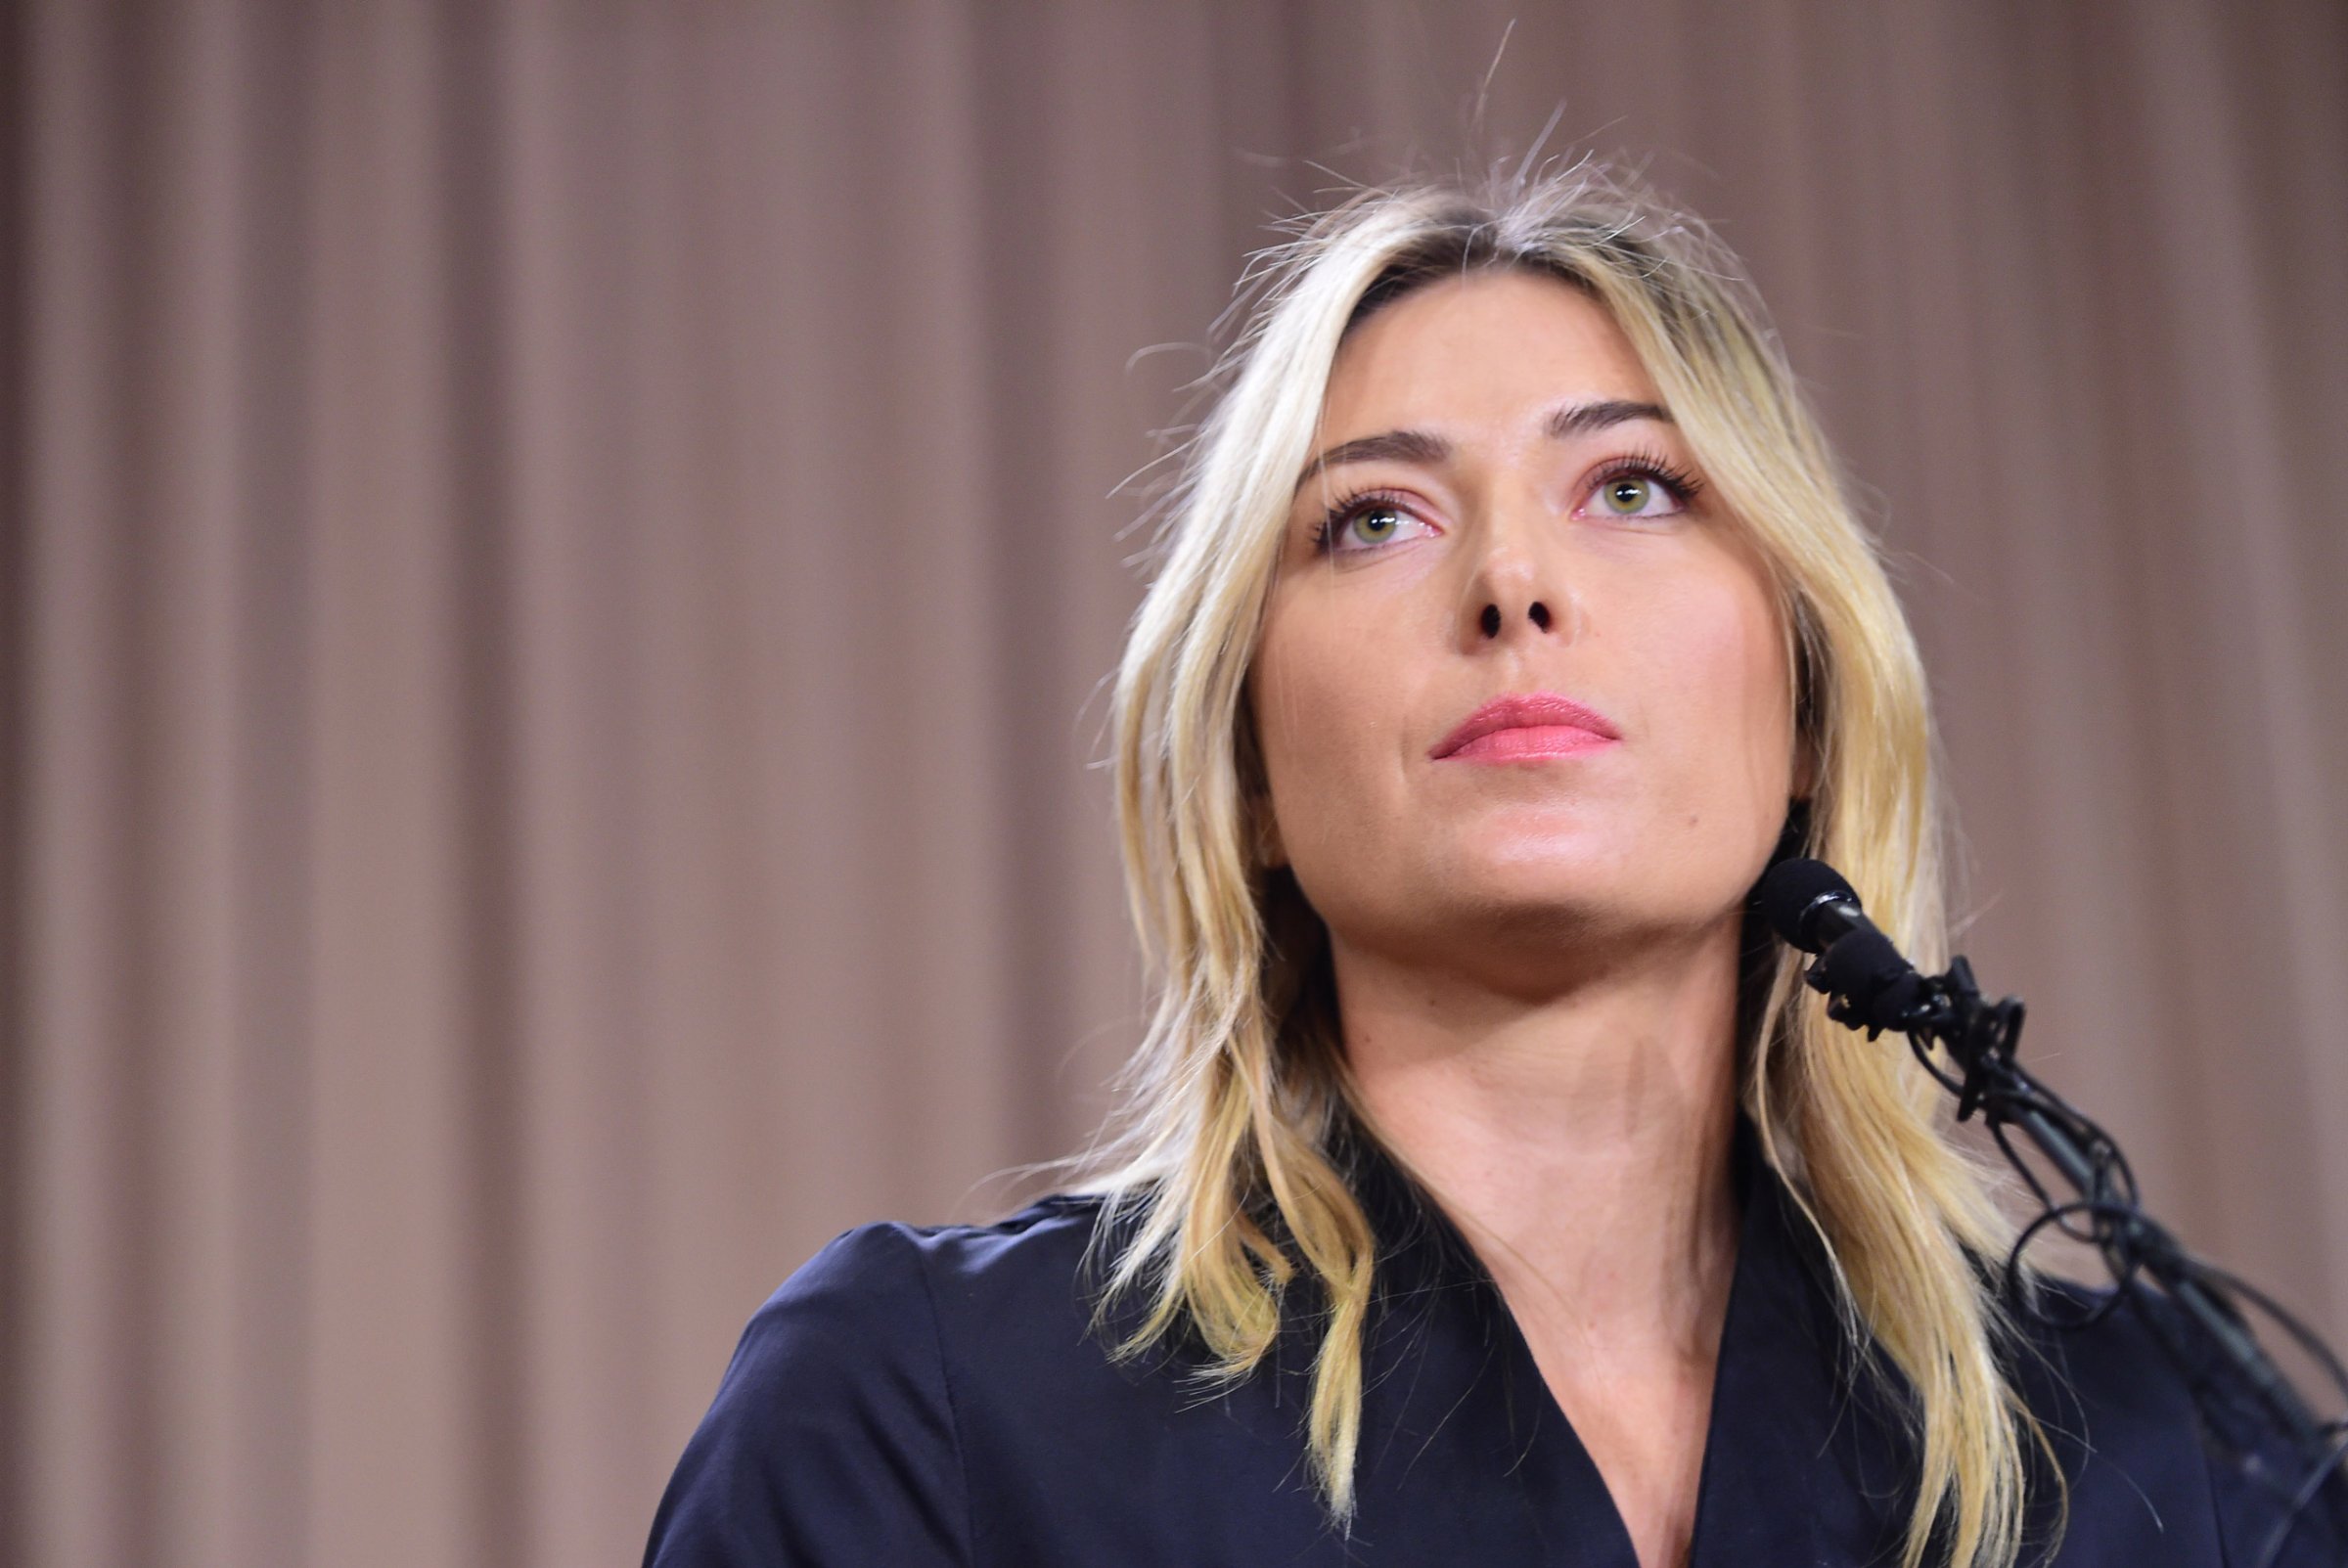 Russian tennis player Maria Sharapova speaks at a press conference in downtown Los Angeles, California, March 7, 2016. / AFP / Robyn Beck (Photo credit should read ROBYN BECK/AFP/Getty Images)